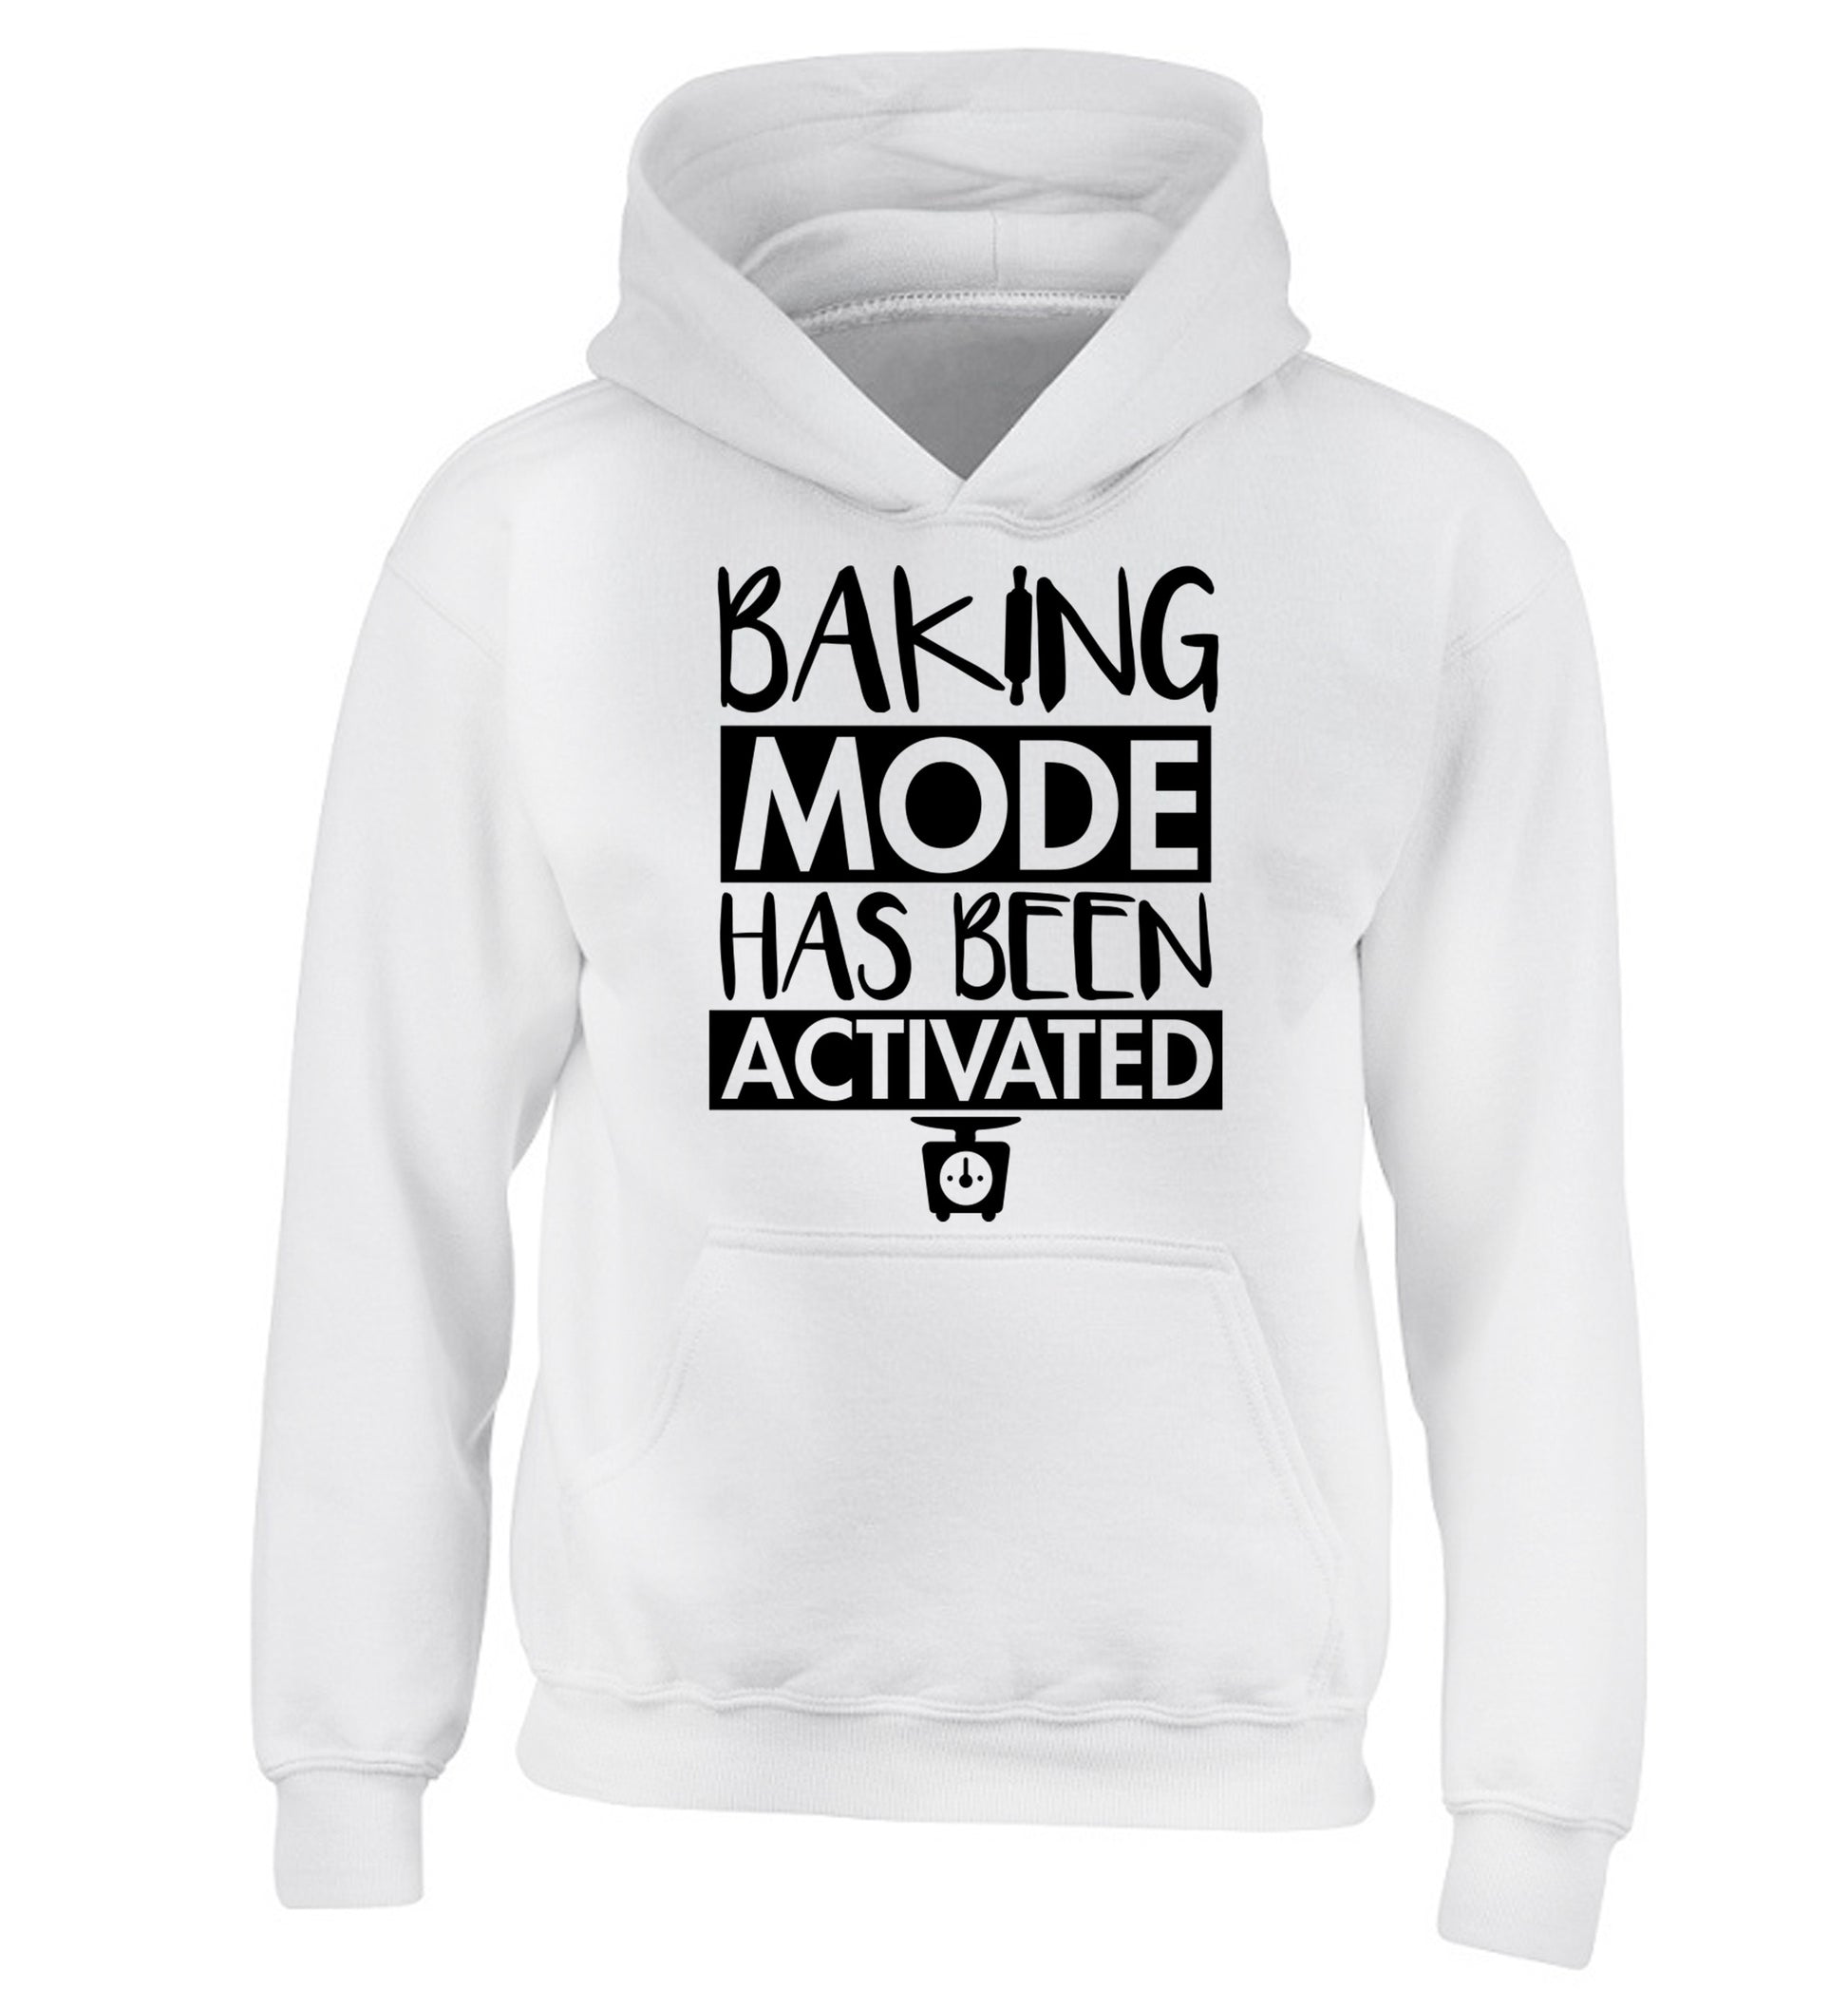 Baking mode has been activated children's white hoodie 12-14 Years